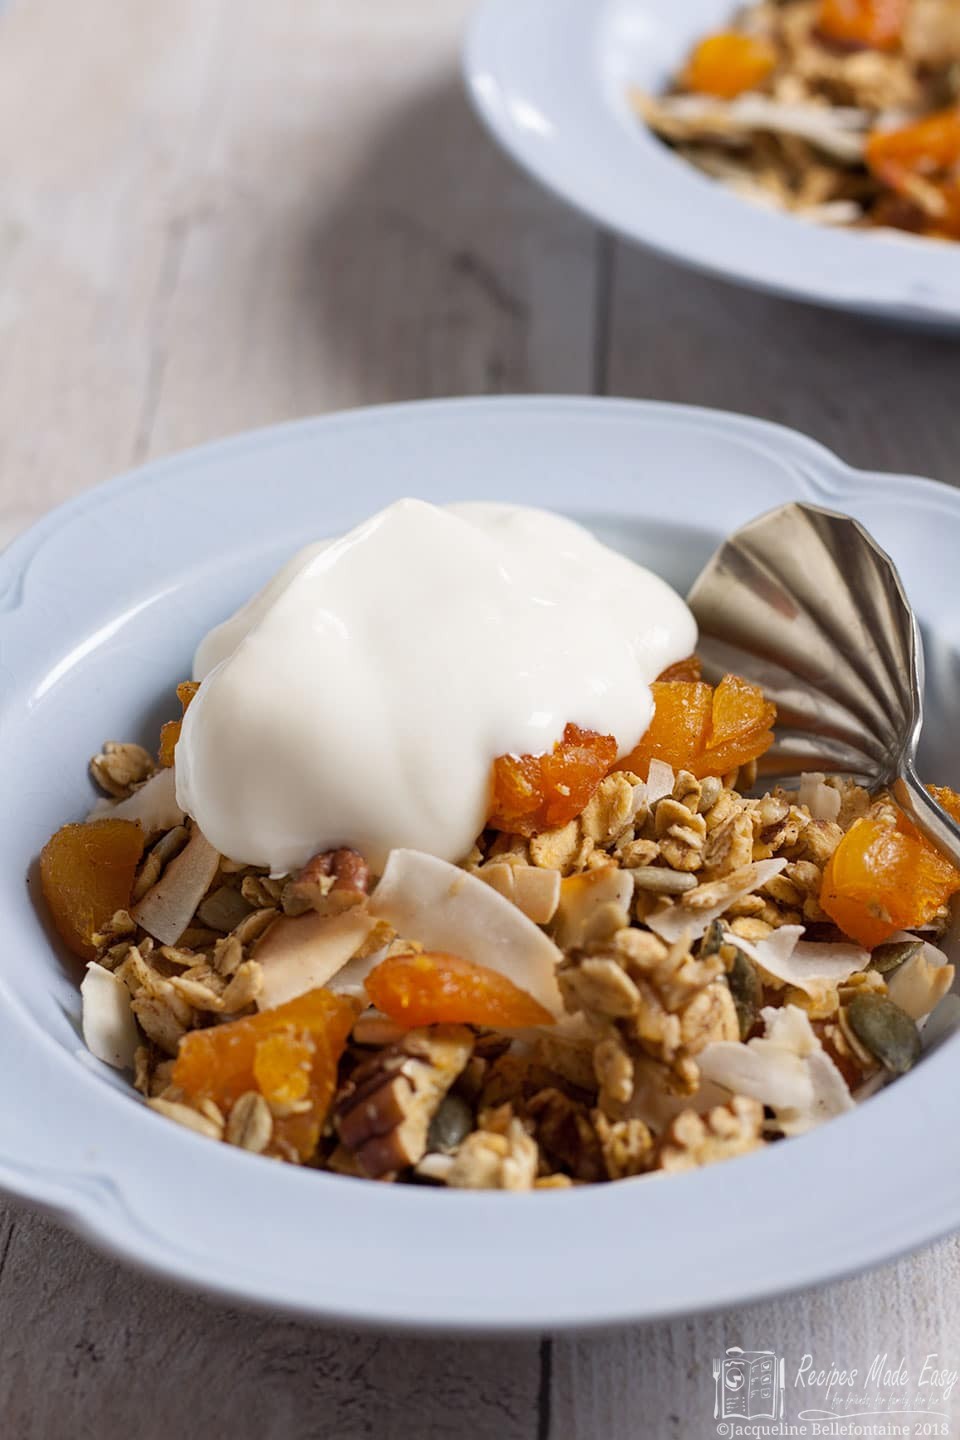 Recipes Made Easy - Apricot, pecan and coconut granola - by recipemadeeasy.co.uk